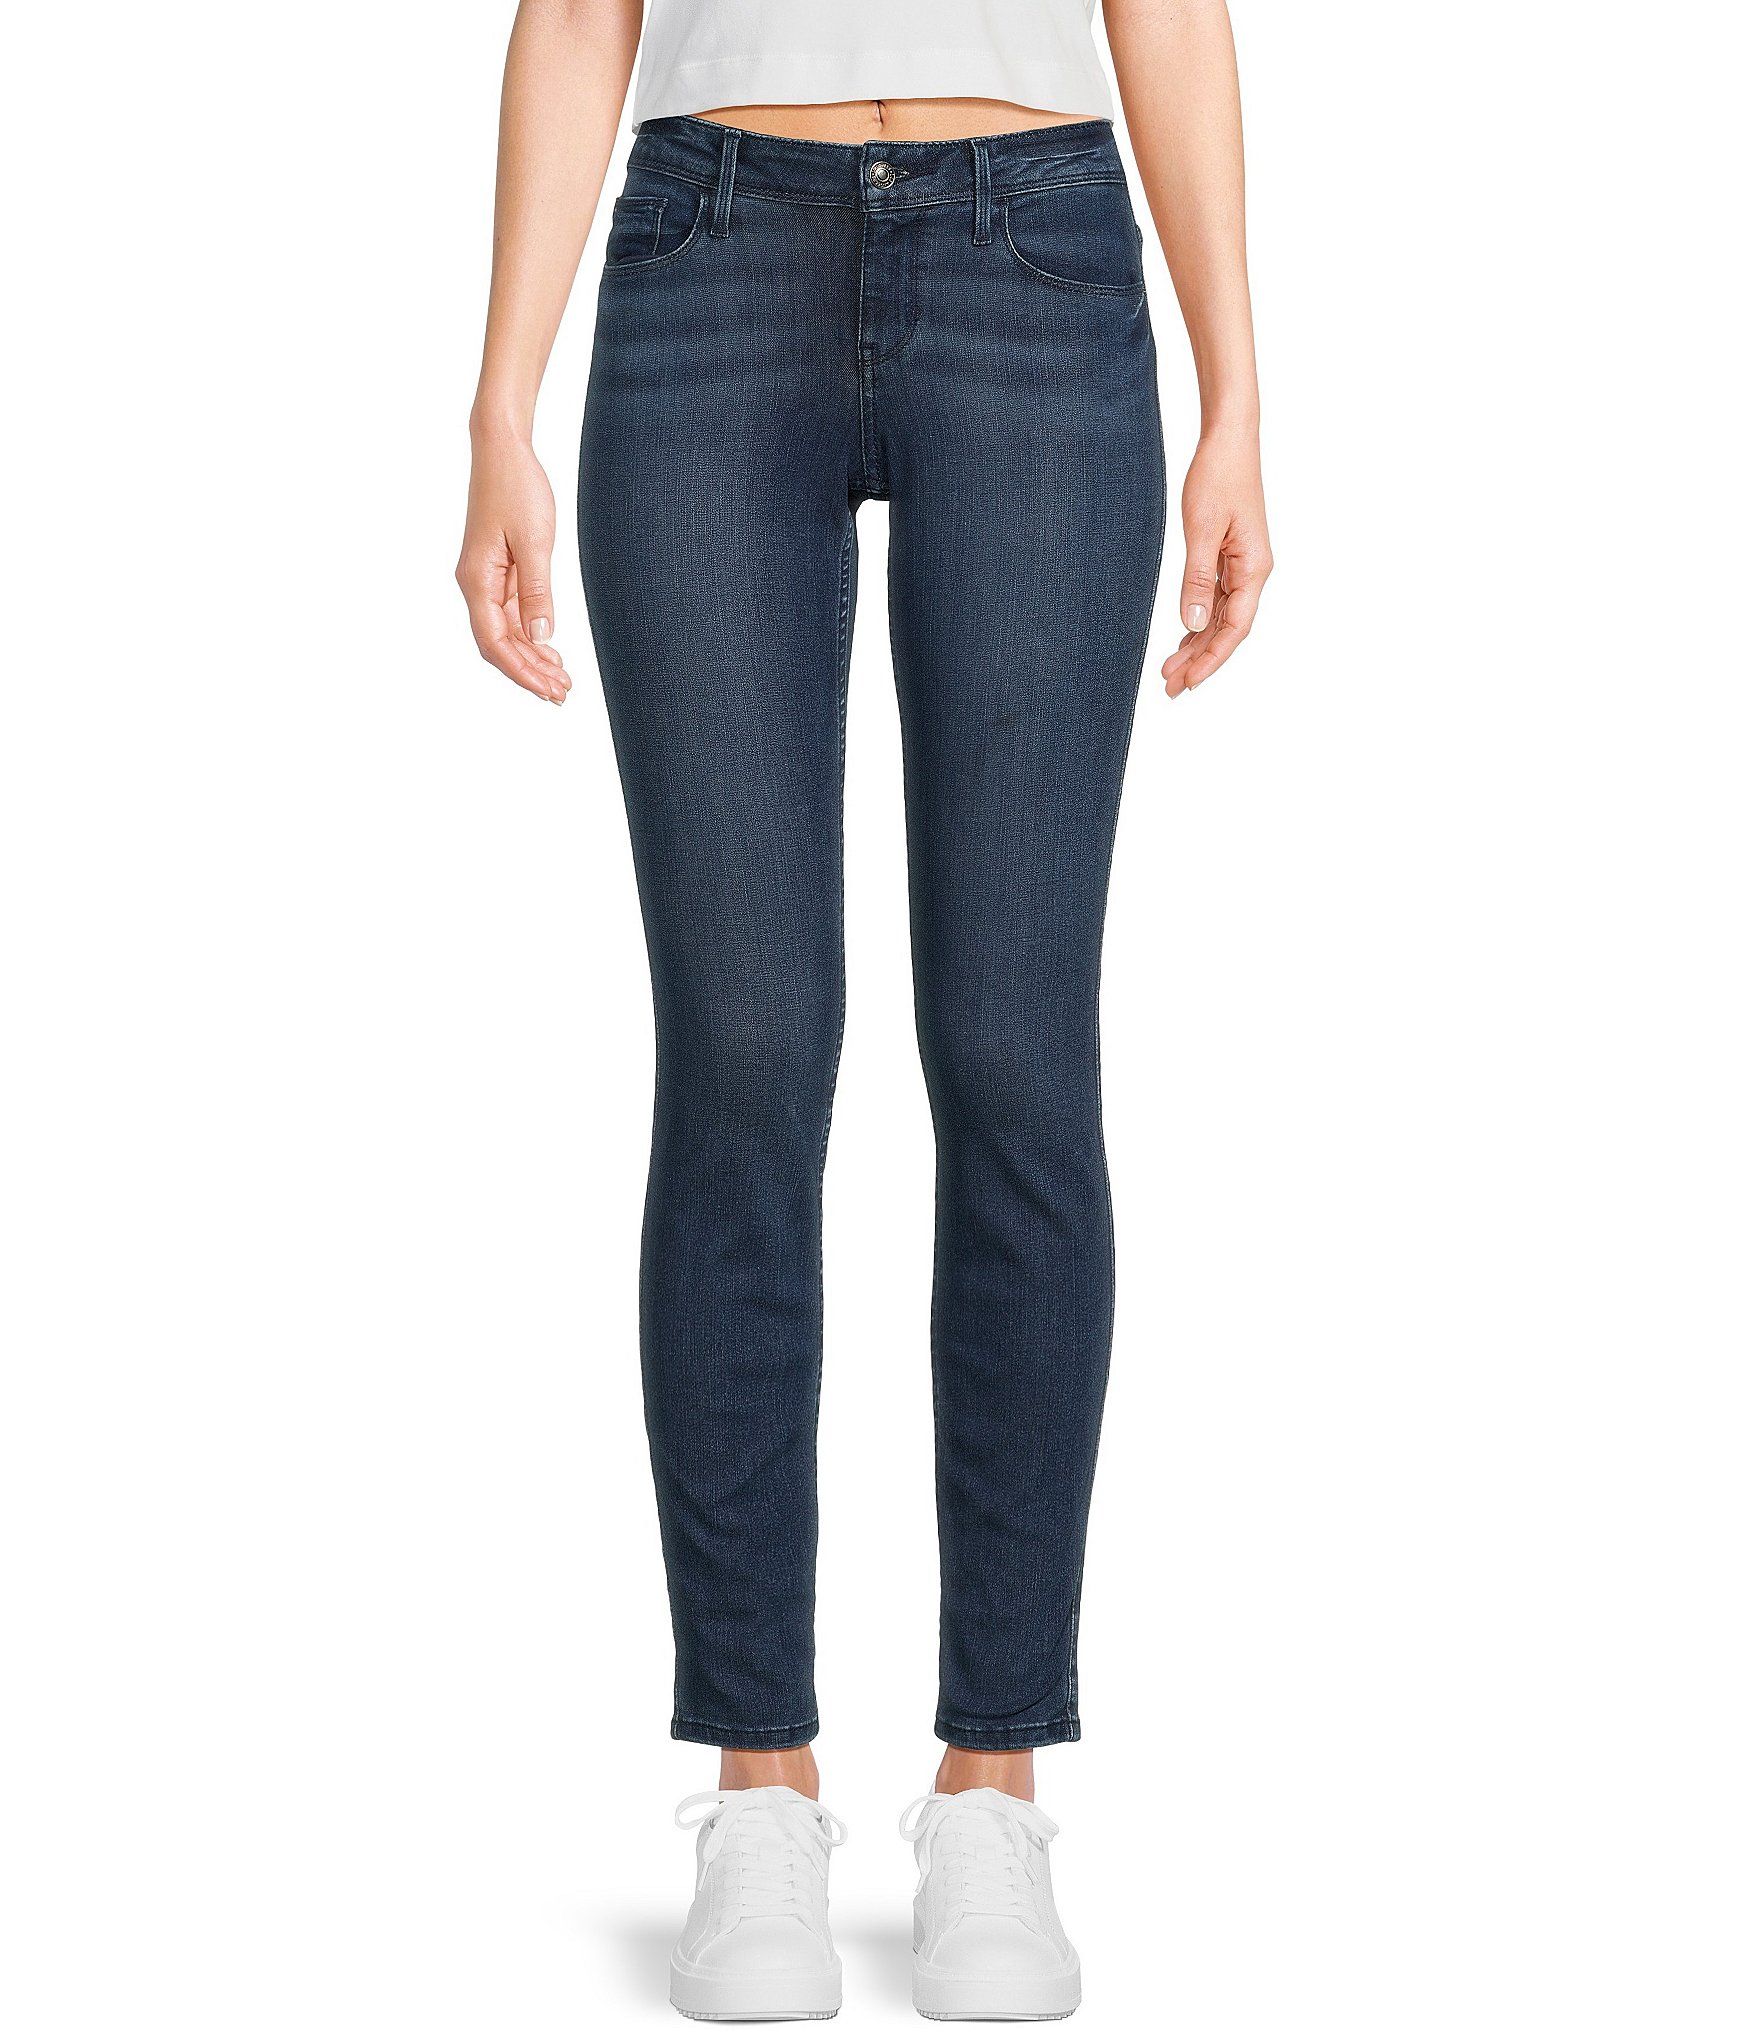 Eco Power Curvy Mid-Rise Skinny Jeans